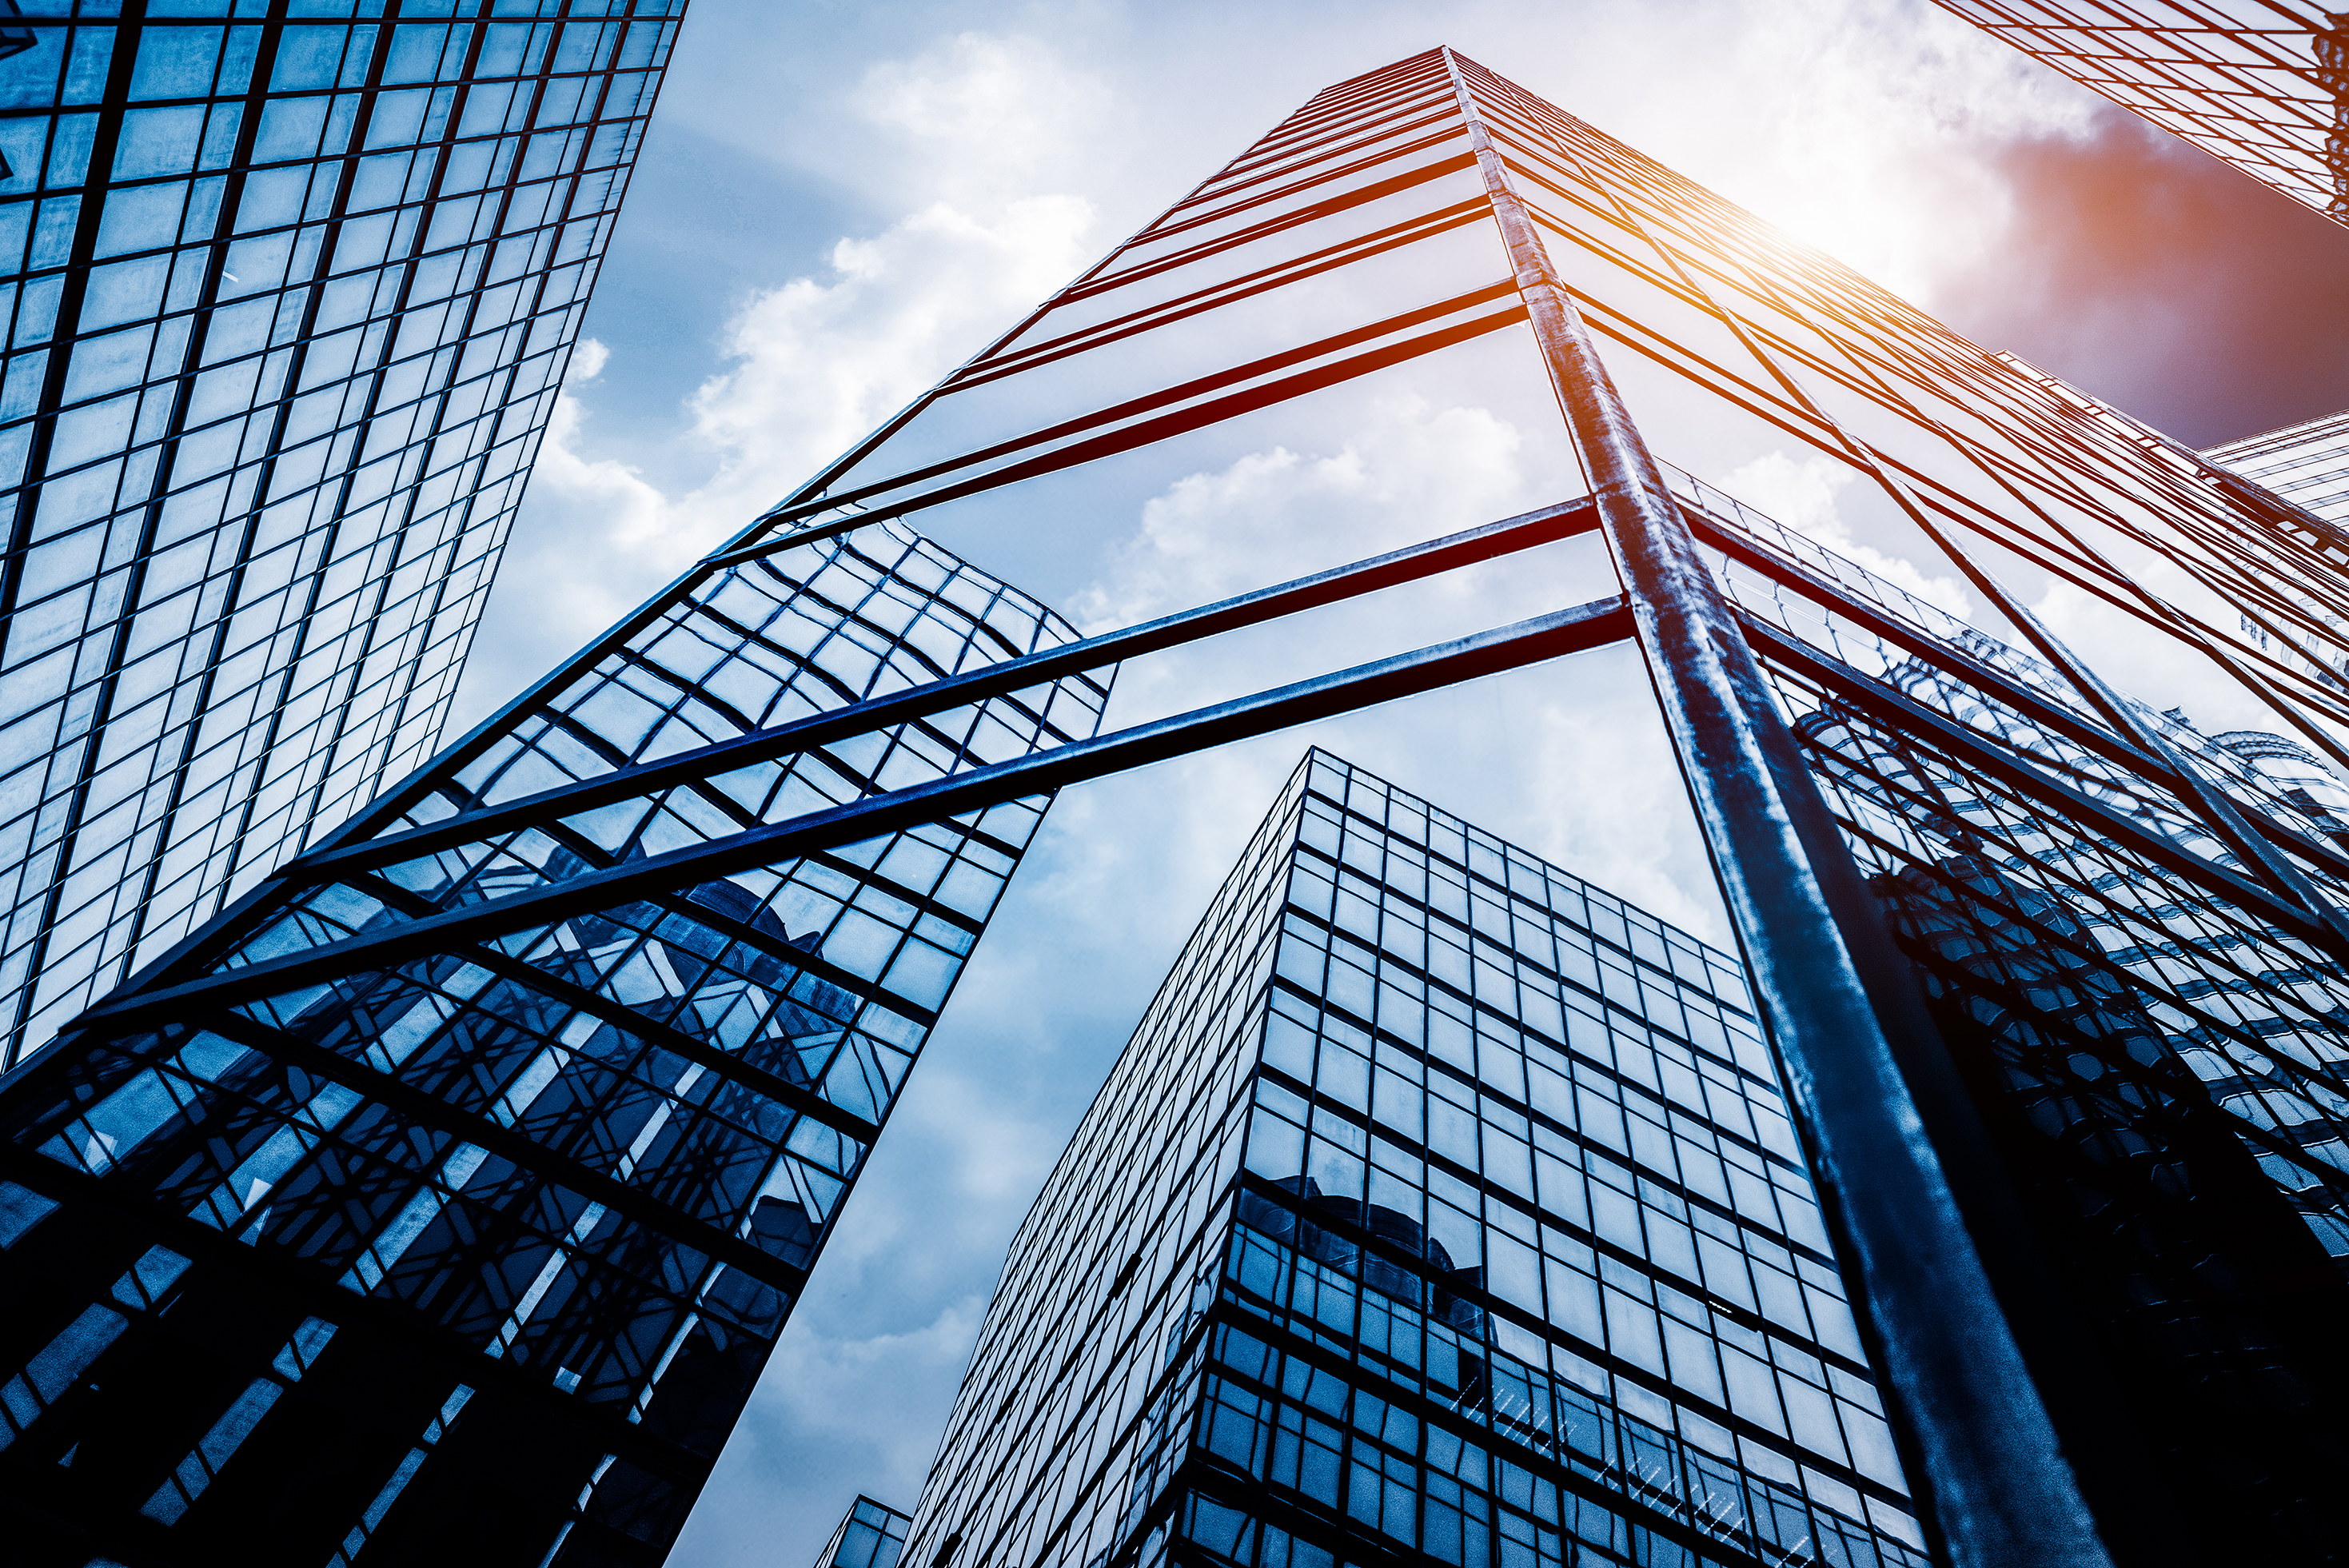 New research shows resilient strata businesses focused on growth